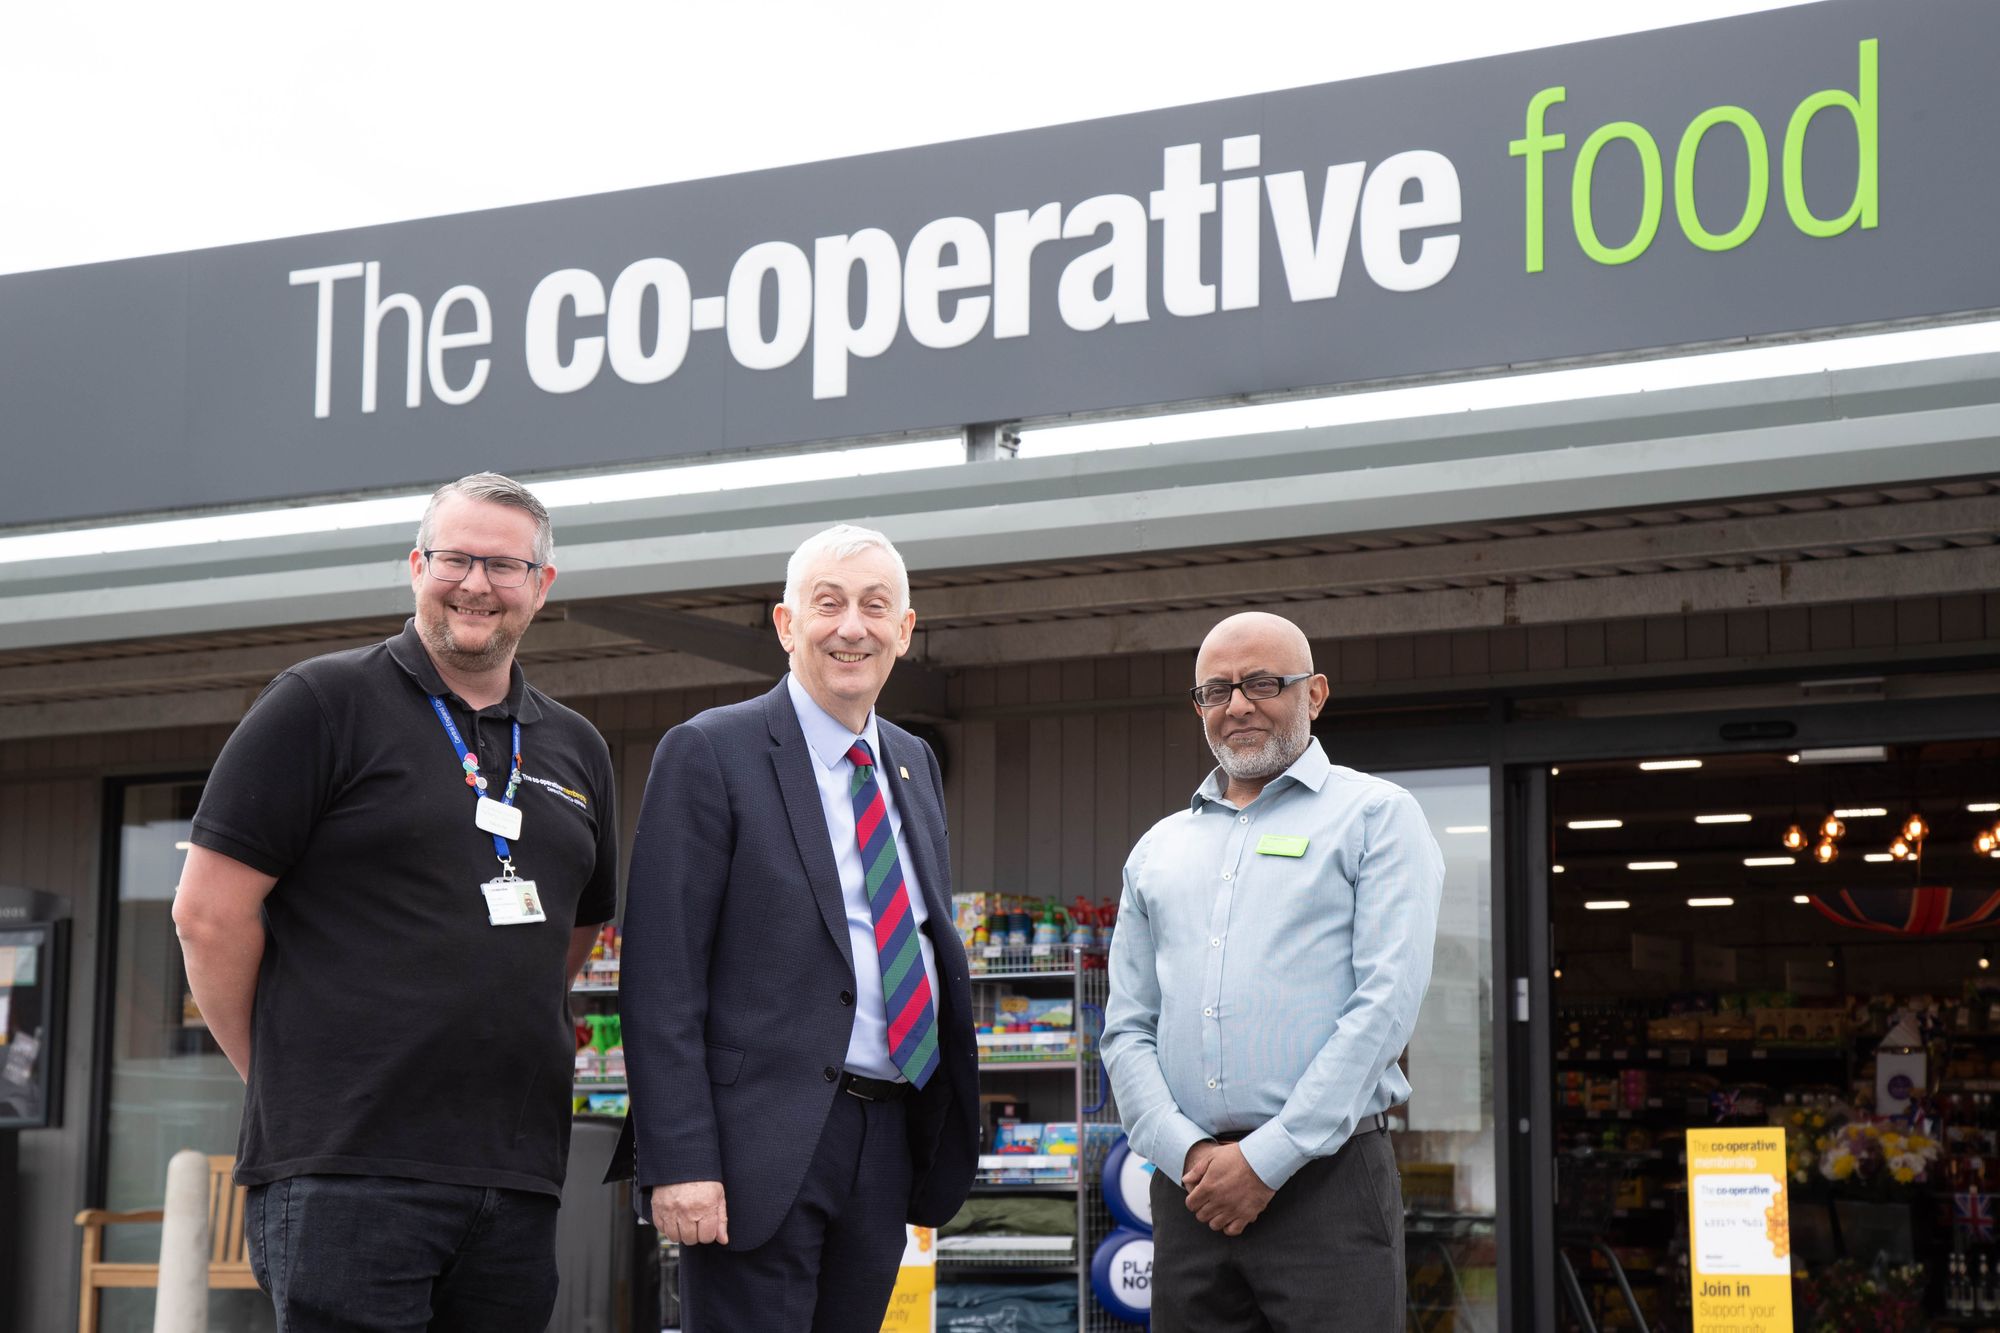 Commons Speaker and Lancashire MP makes visit to new food store to mark its launch